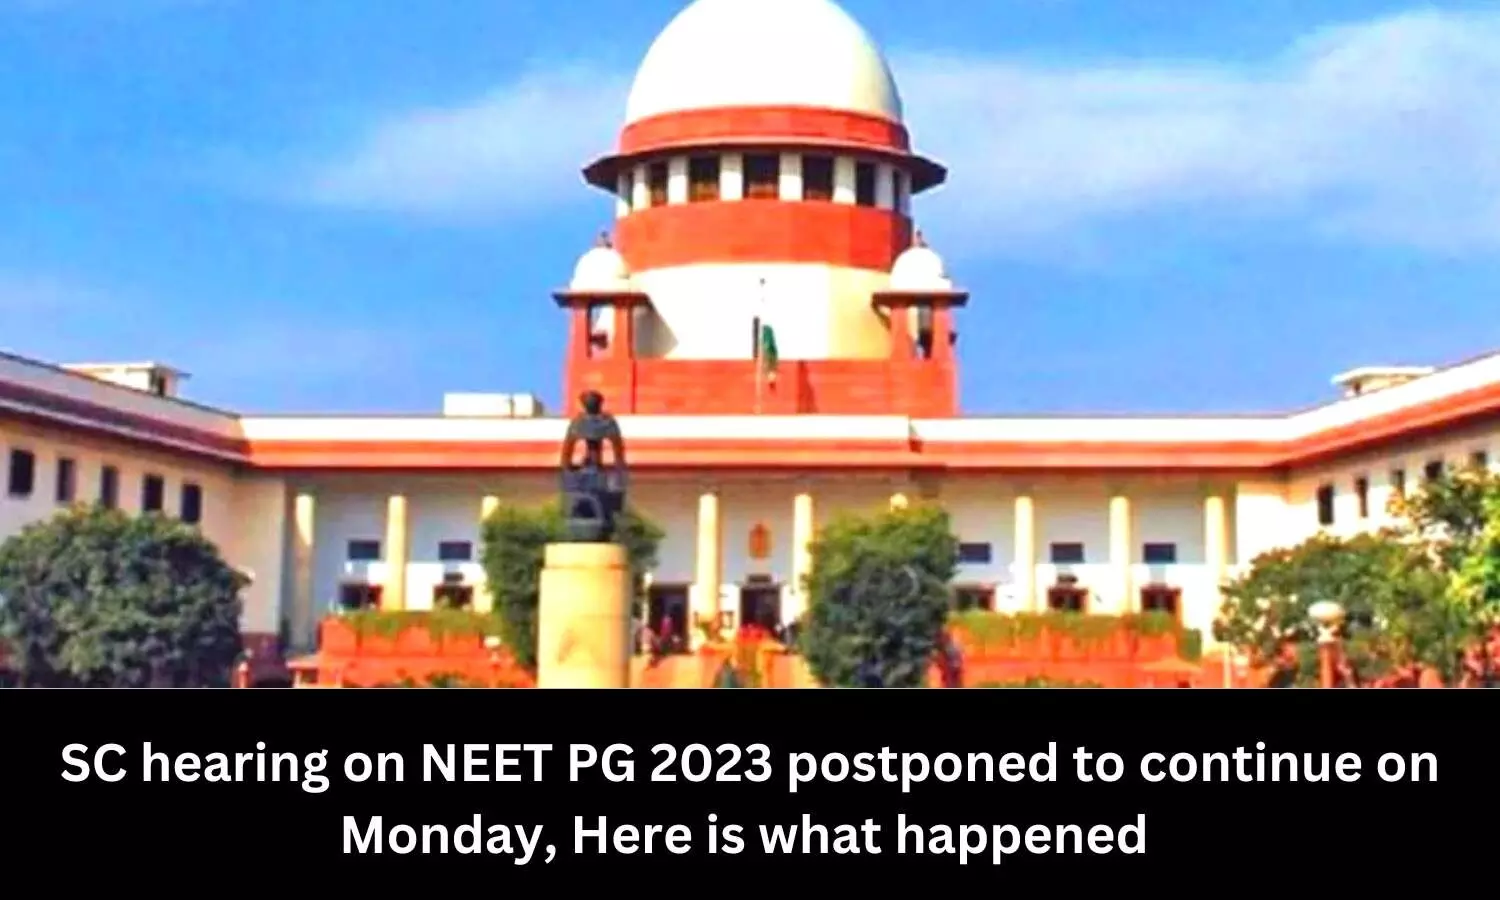 Supreme Court hearing on NEET PG 2023 postponed, to continue on Monday